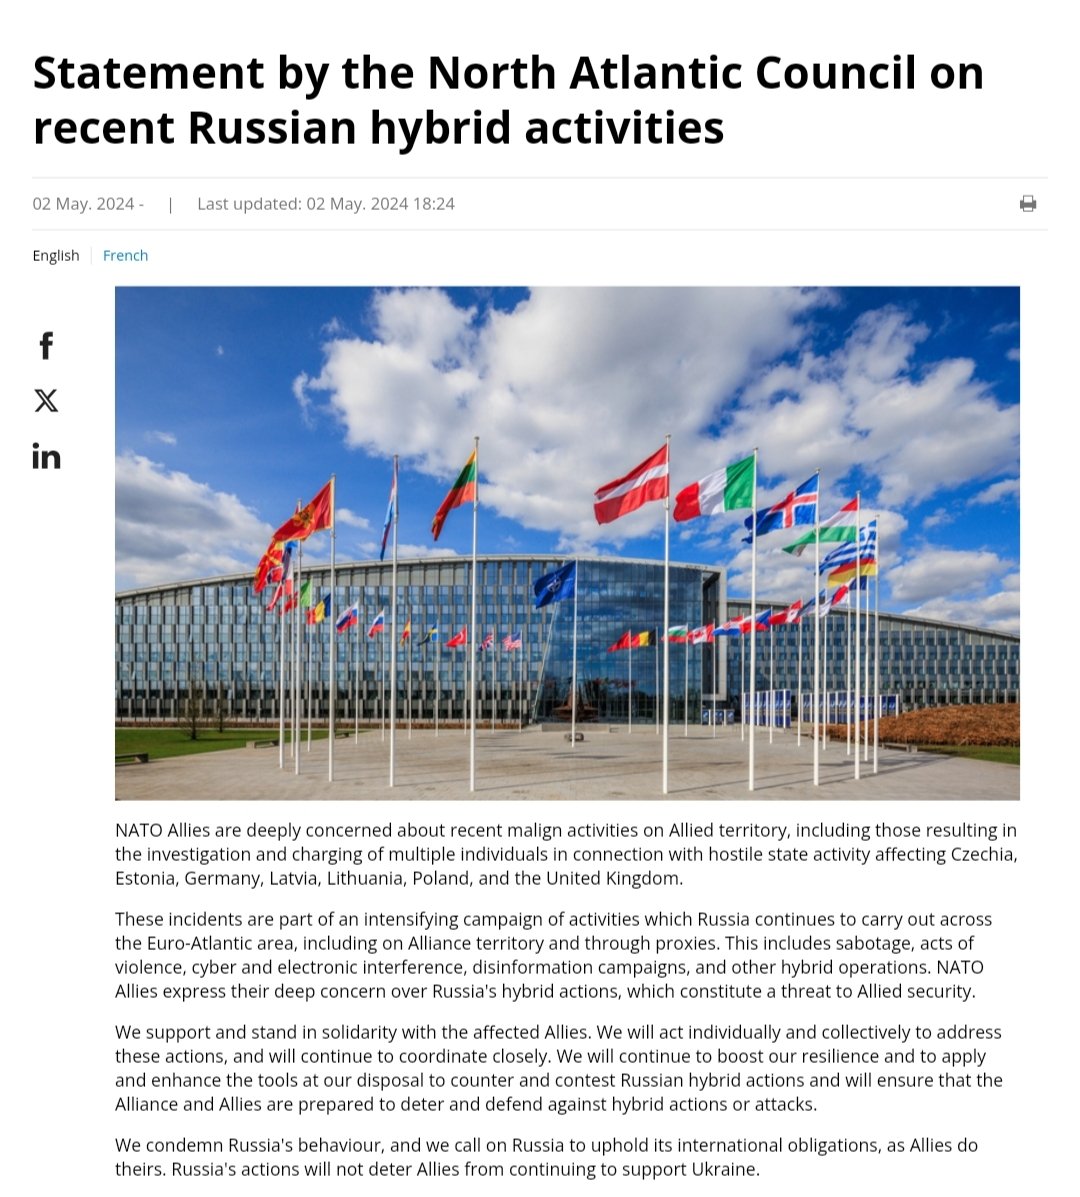 #BREAKING: NATO released an official statement regarding 'recent Russian hybrid activities' on the territory of the Alliance. NATO blames Russia for conducting acts of sabotage, acts of violence, cyber and electronic interference, as well as disinformation campaigns, which